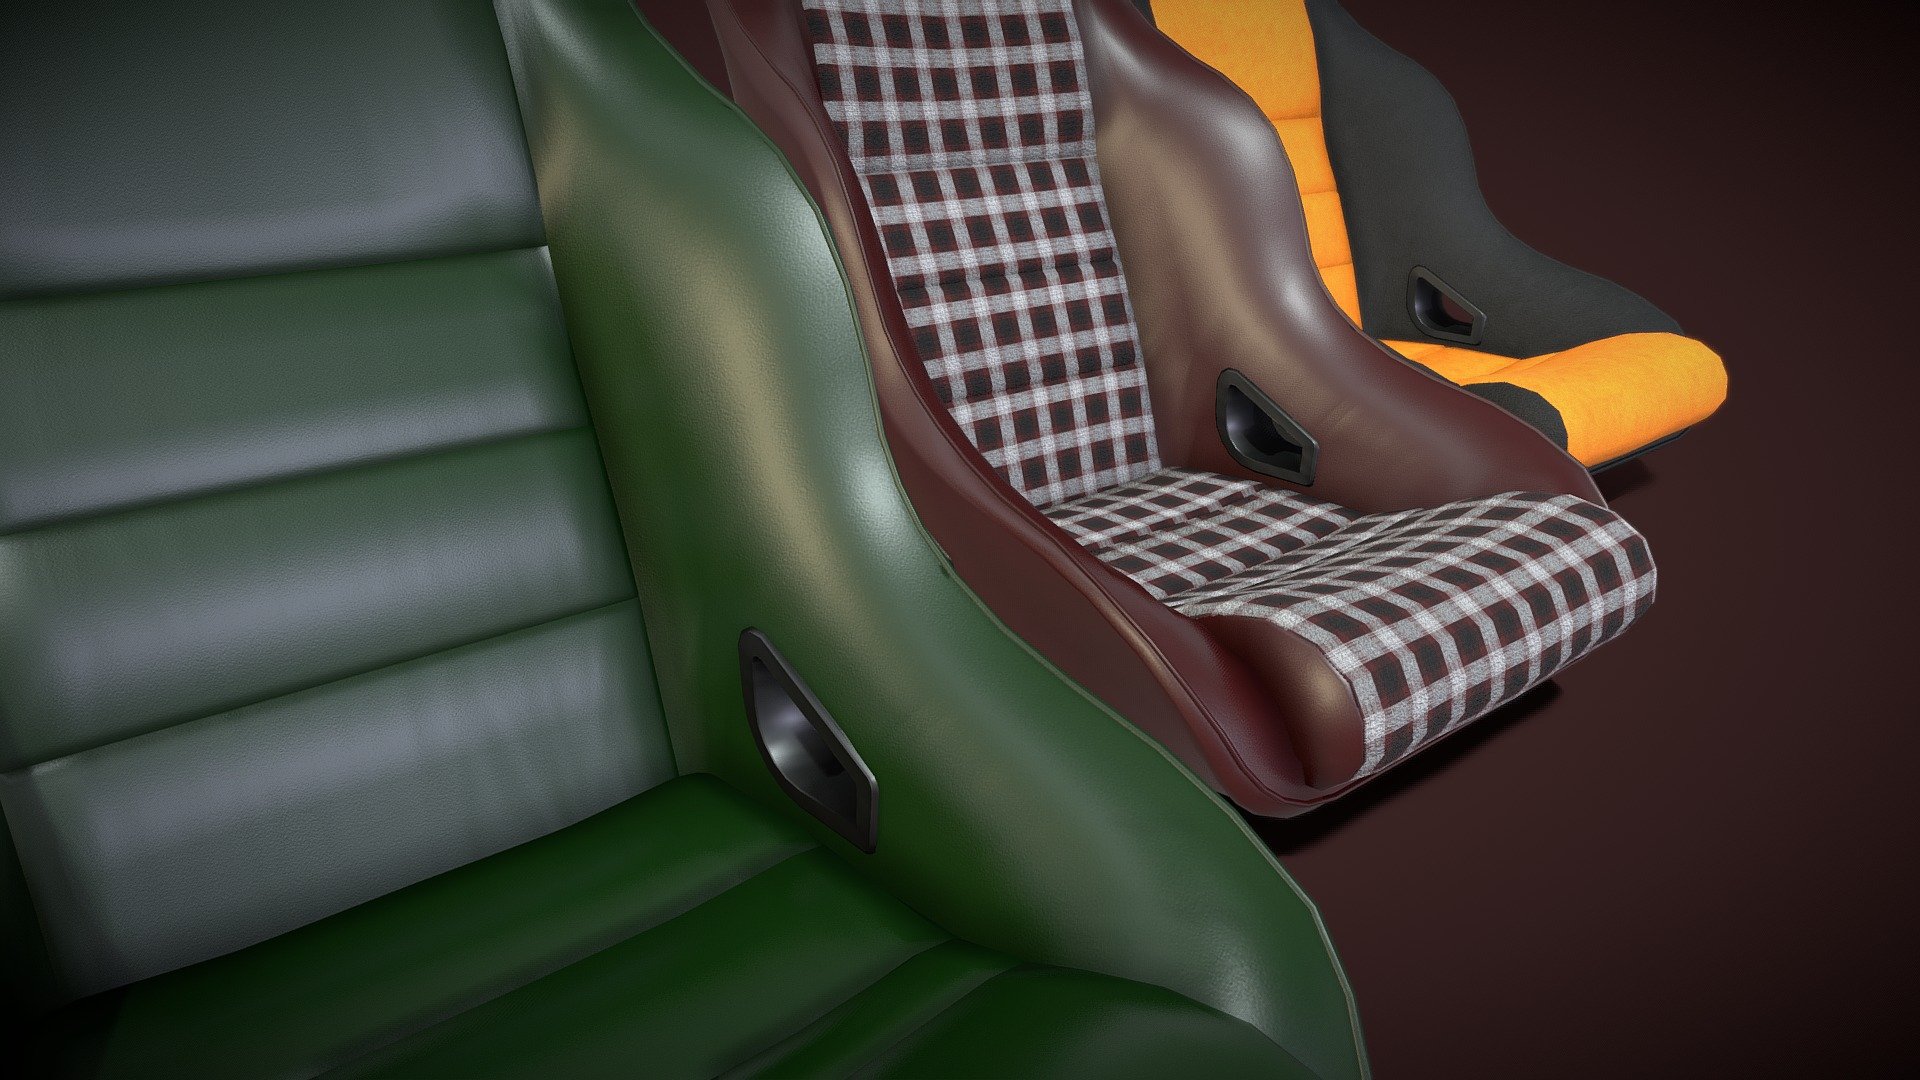 The BF Rally ST sport seats I made for the Backdate and 911SC models. You can of course use it universally where you want. The texture sets are in leather, tartan and microfiber variants.
Midpoly, PBR, short animation to show the simple headrest rig 3d model